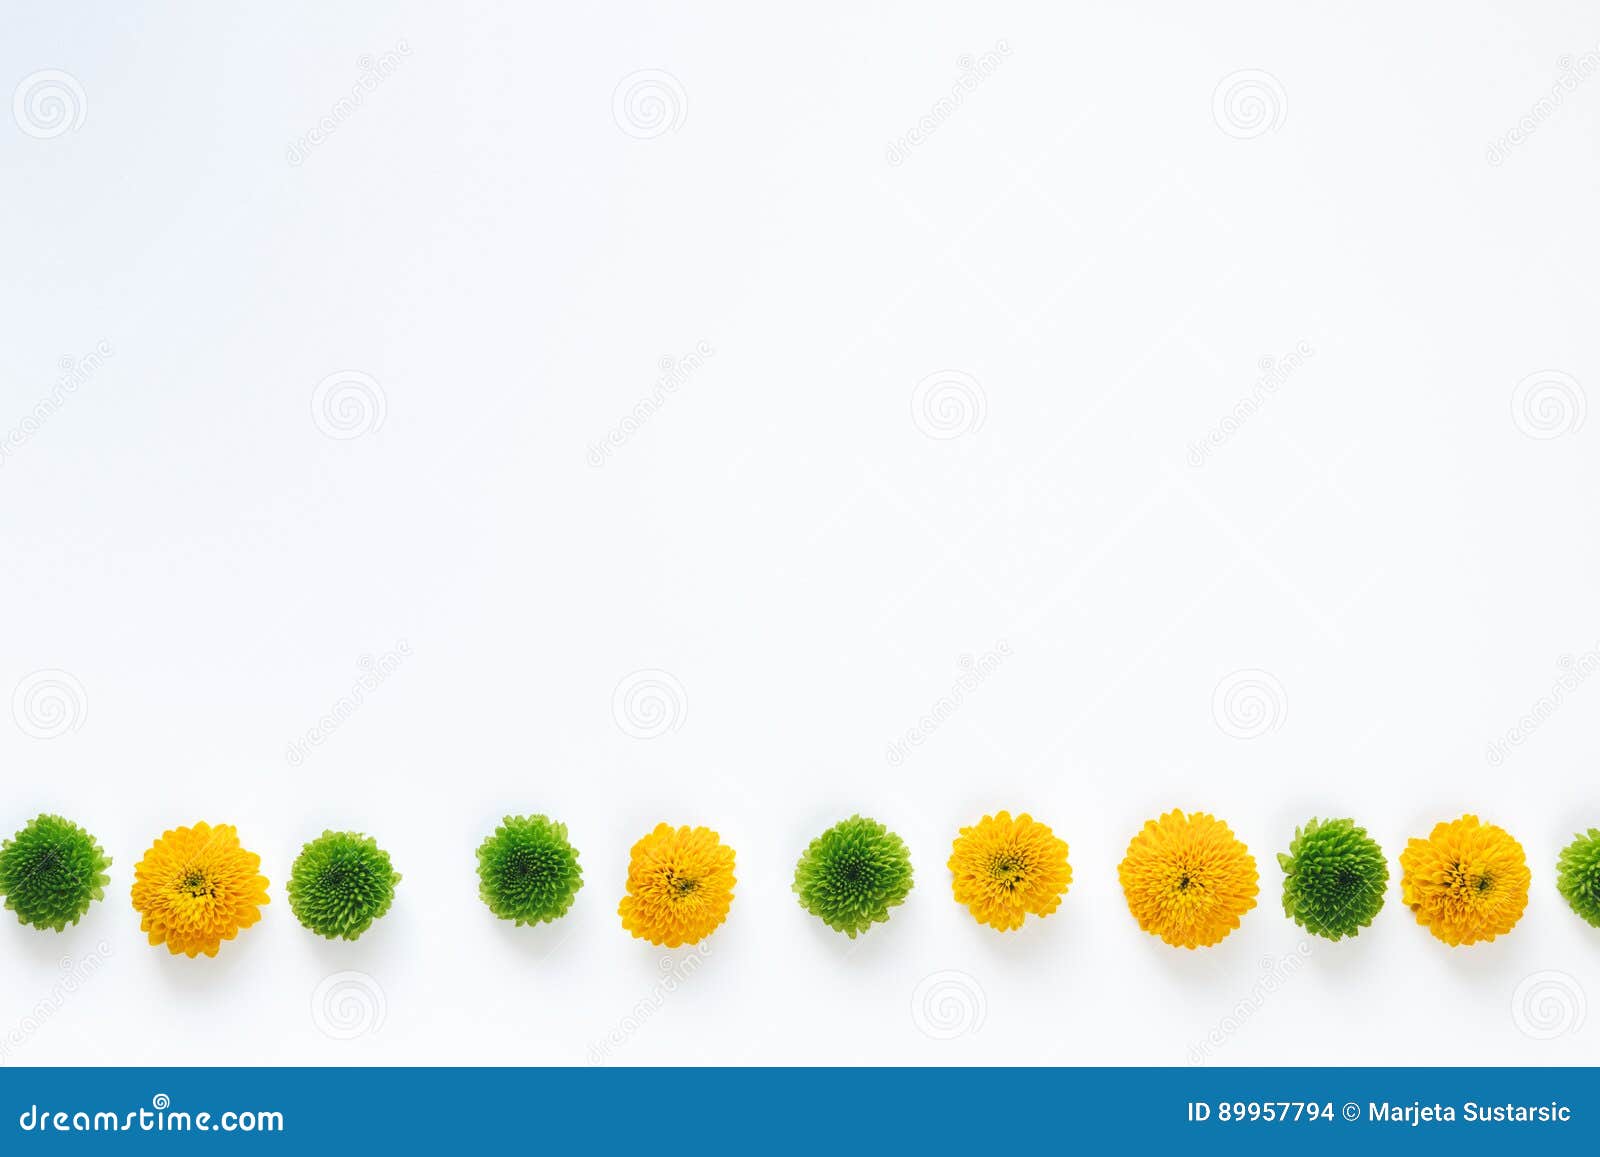 Colorful Floral Border stock photo. Image of composition - 89957794